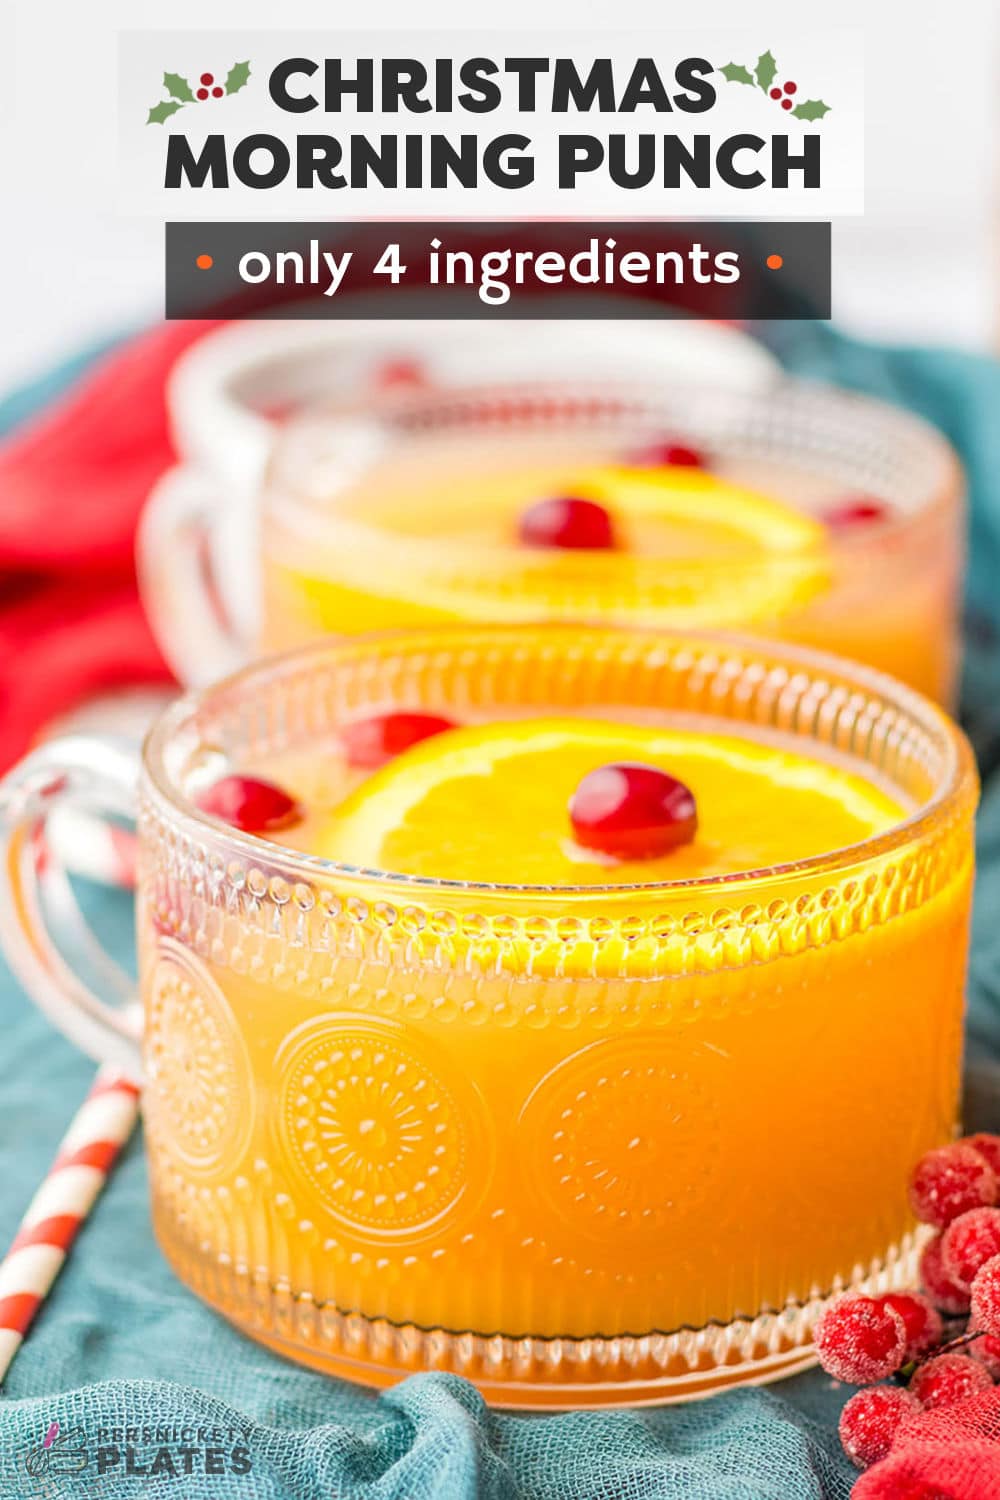 Presents from Santa aren't the only reason to get excited about Christmas morning! This family-friendly and festive Christmas morning punch recipe is a combination of pineapple juice, orange juice, cranberry cocktail, and ginger ale, garnished with cranberries and fresh orange slices, and the perfect way to get the holiday festivities off to a refreshing start! | www.persnicketyplates.com